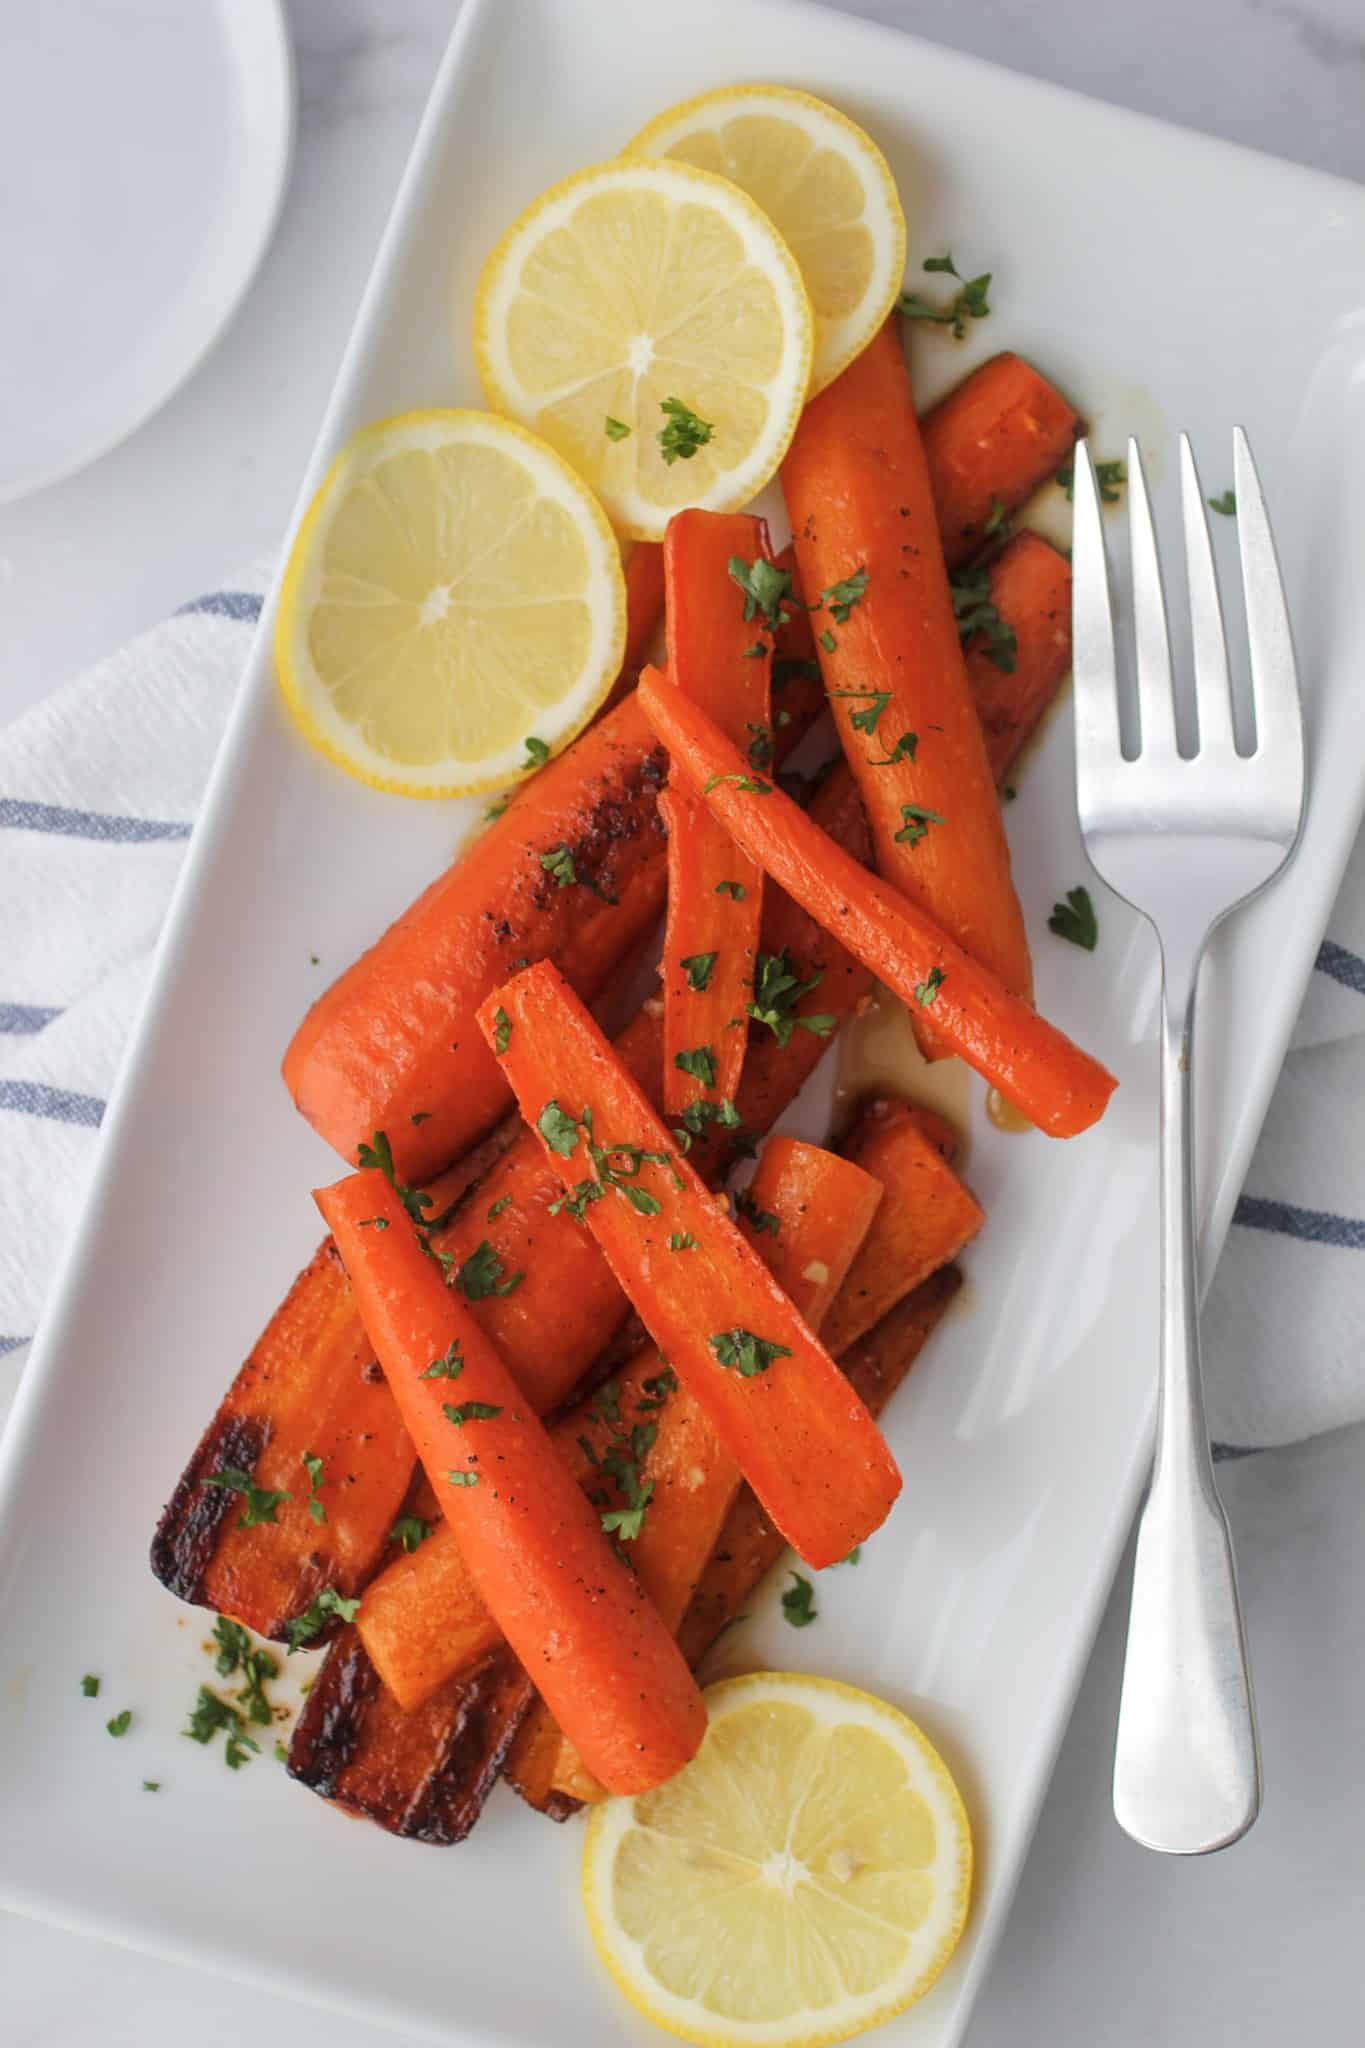 Maple roasted carrots on a plate with lemon slices.